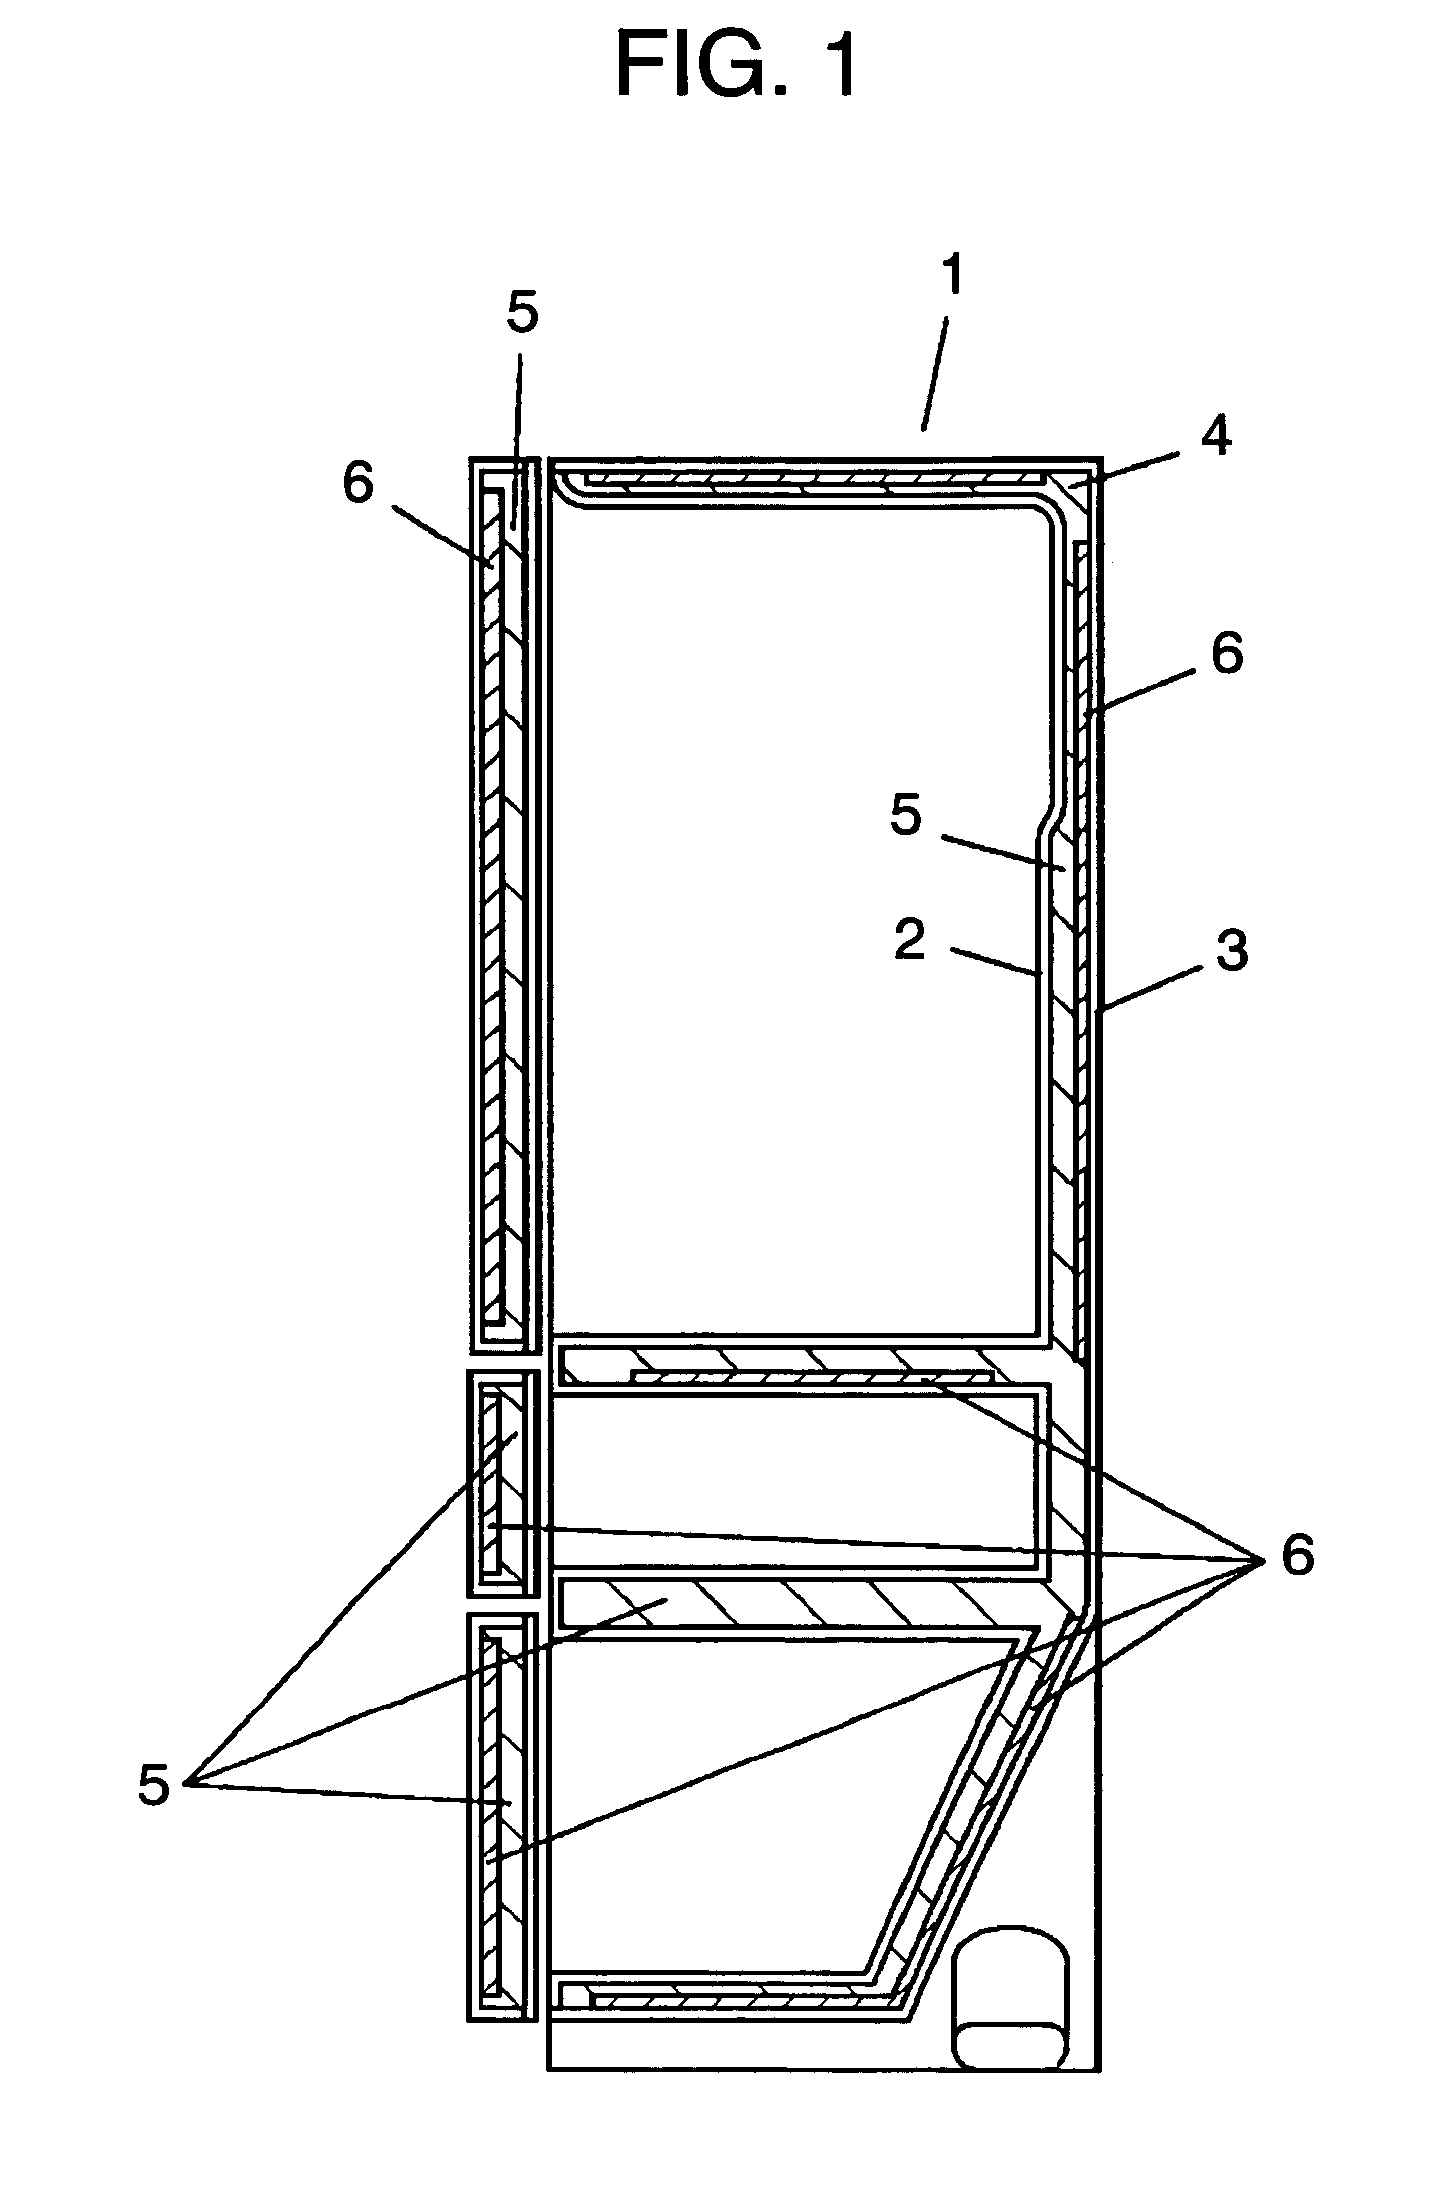 Insulated box body, refrigerator having the box body, and method of recycling materials for insulated box body